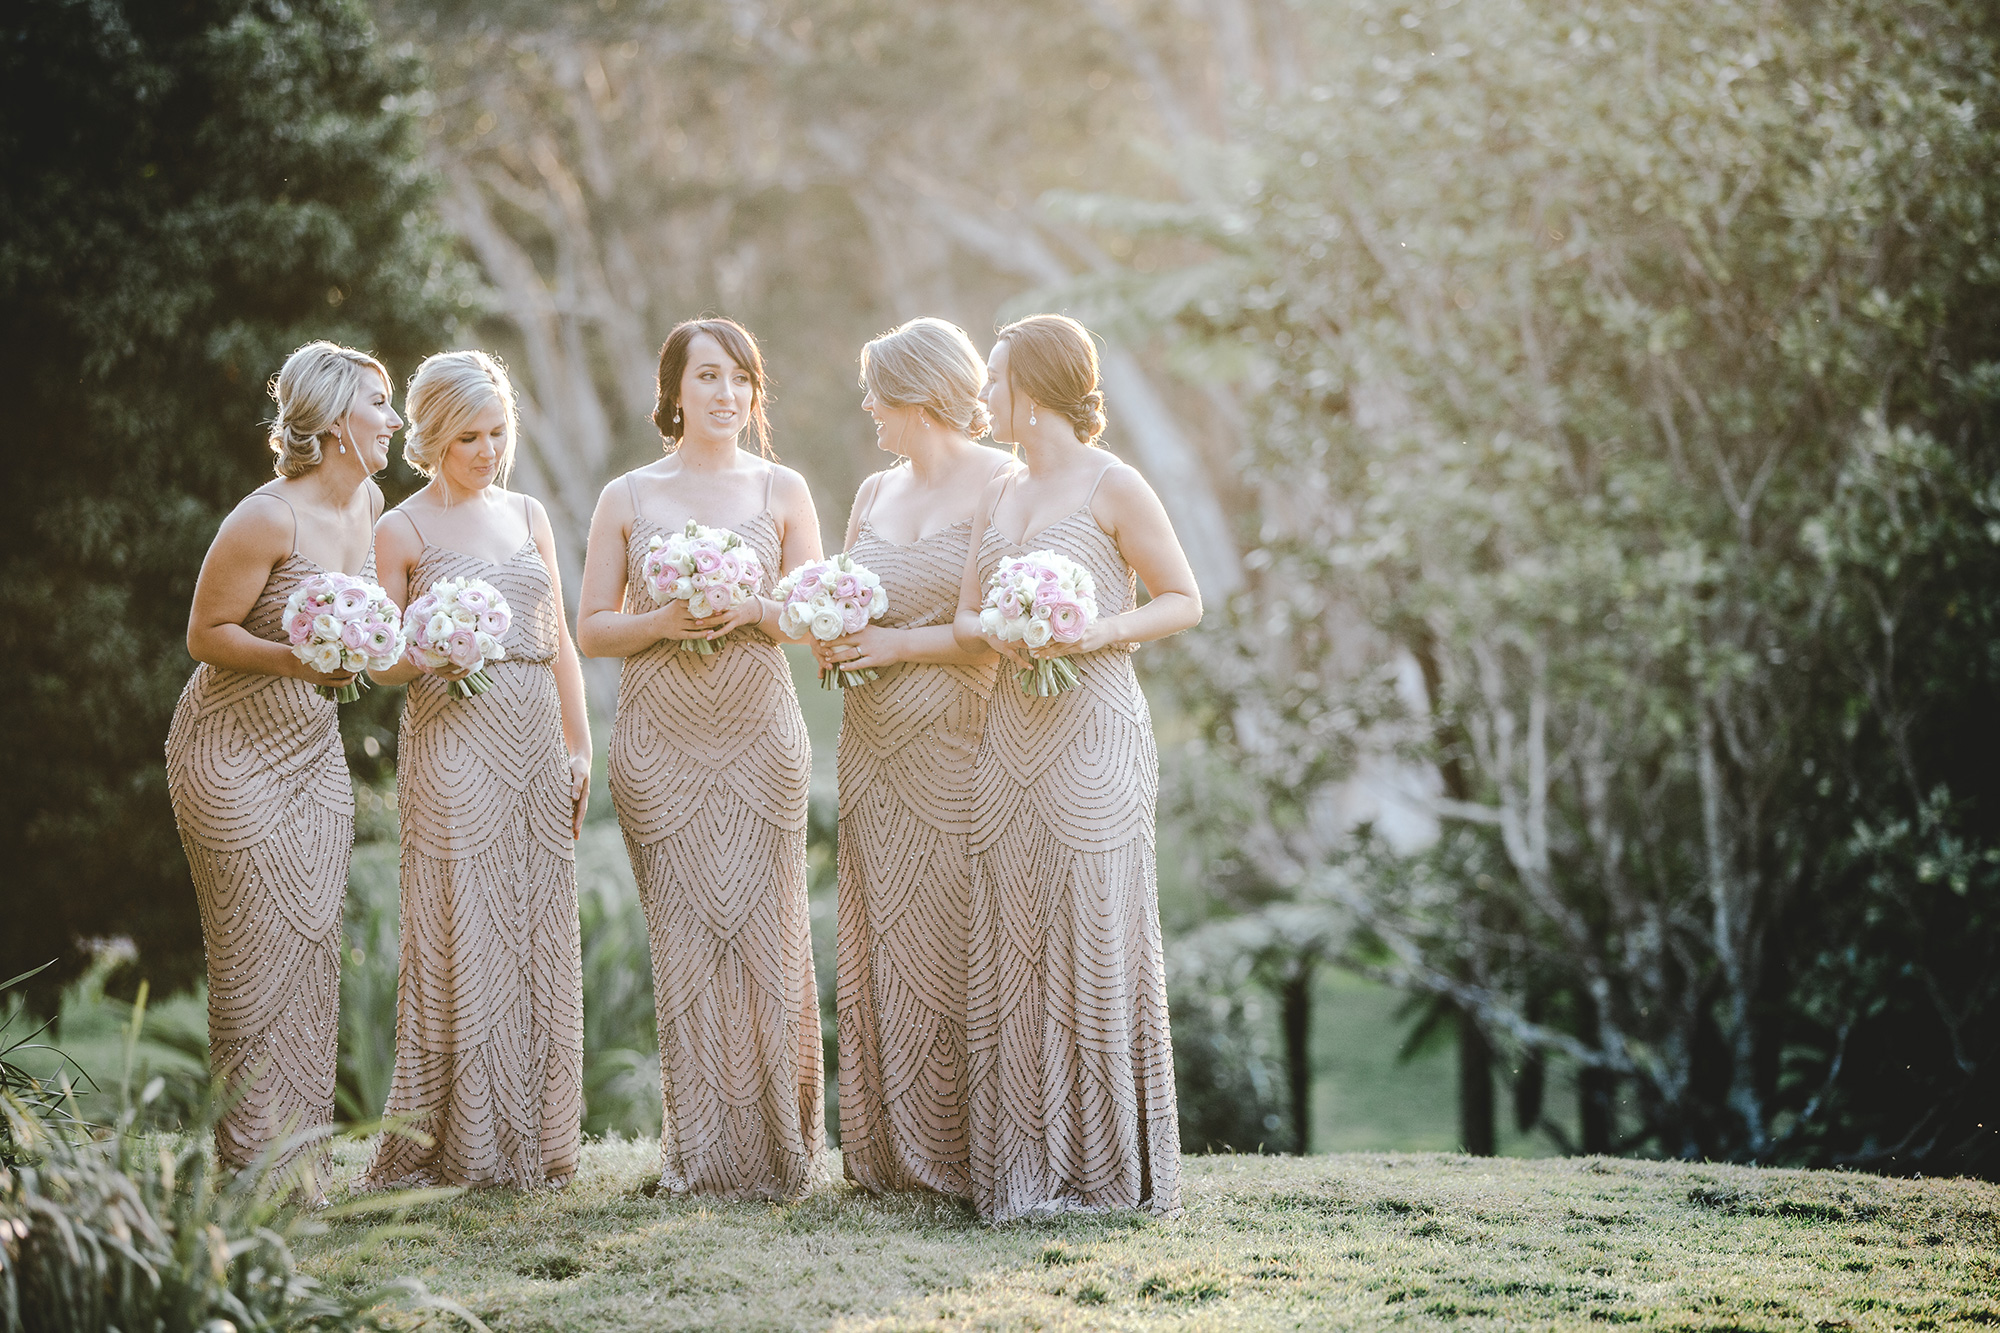 Camille_James_Rustic-Glam-Wedding_Pure-Image-Photography_010